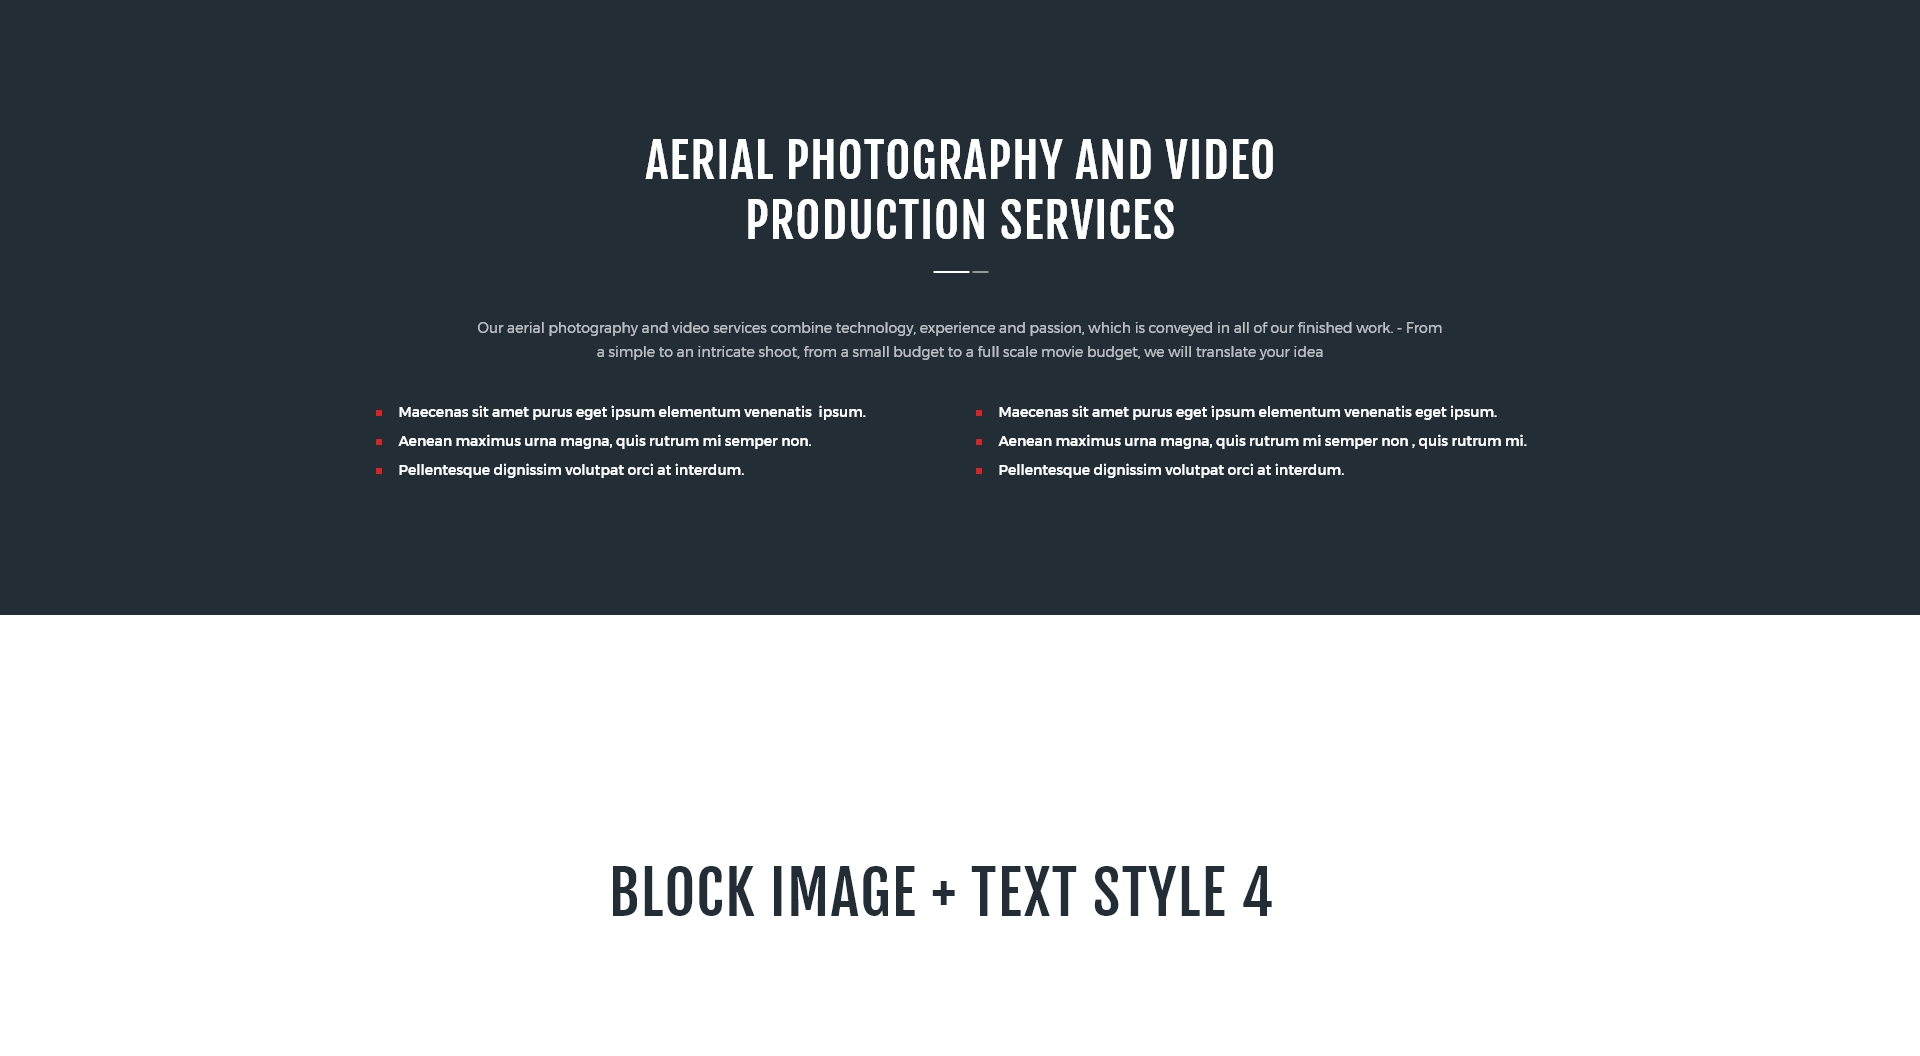 Block image + text style 4